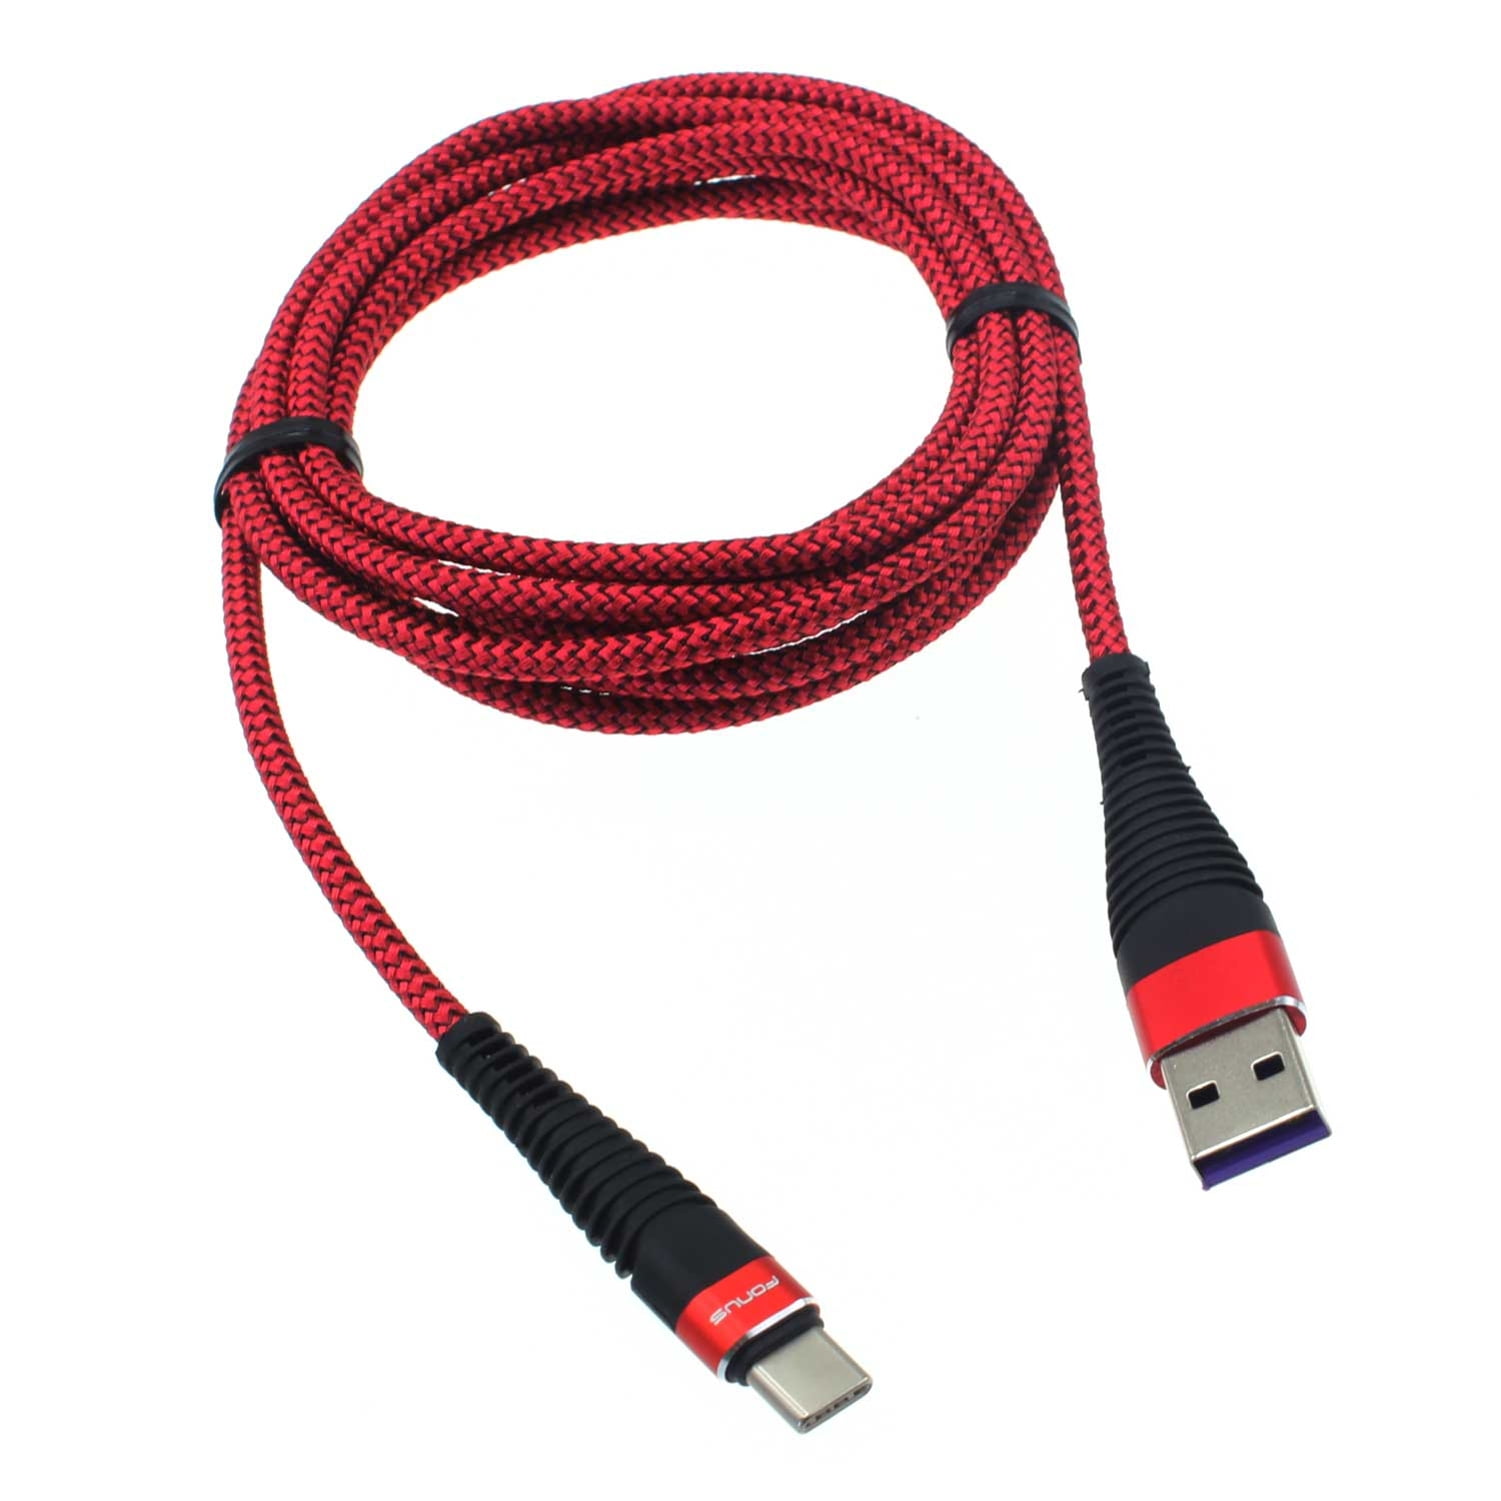 10FT USB CABLE FOR DKNIGHT MAGICBOX ULTRA PORTABLE WIRELESS BLUETOOTH SPEAKER 